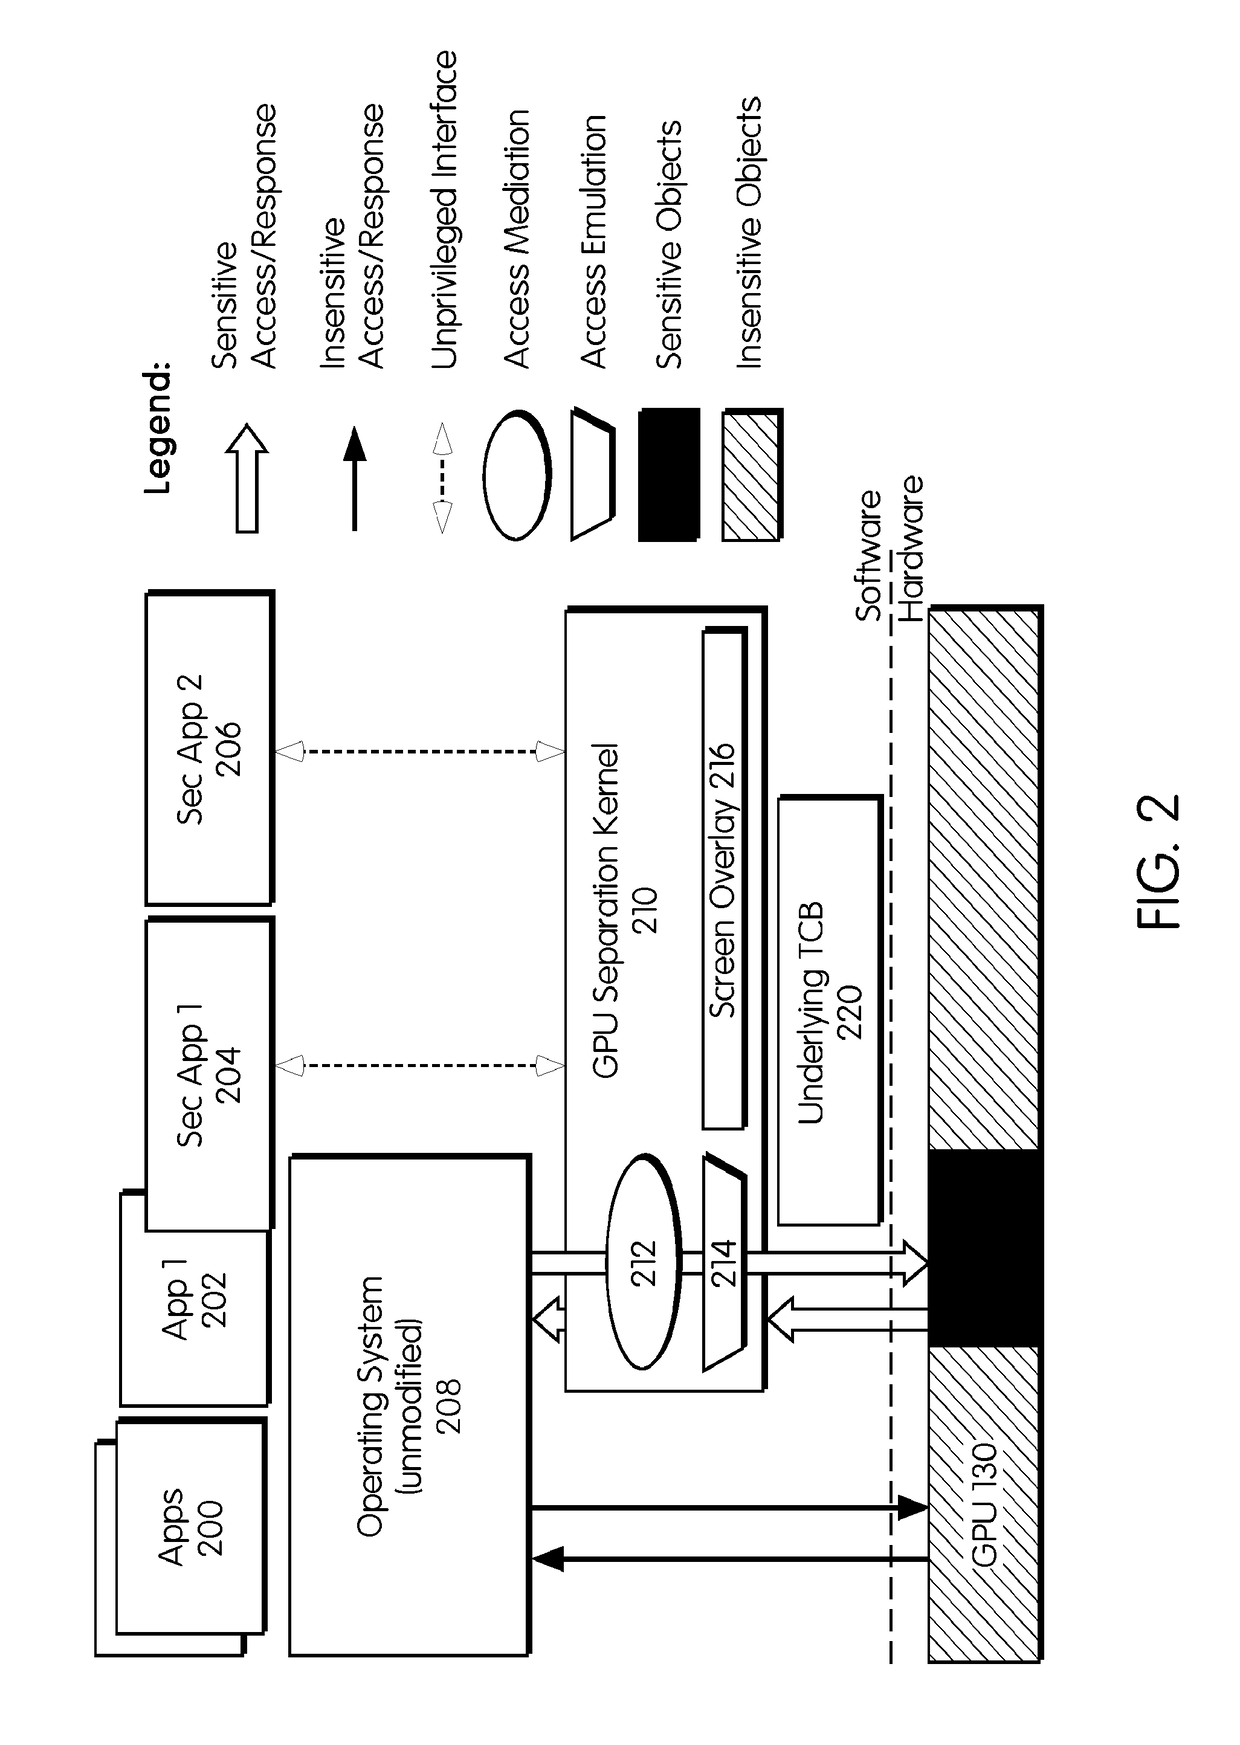 Method and apparatus for trusted display on untrusted computing platforms to secure applications